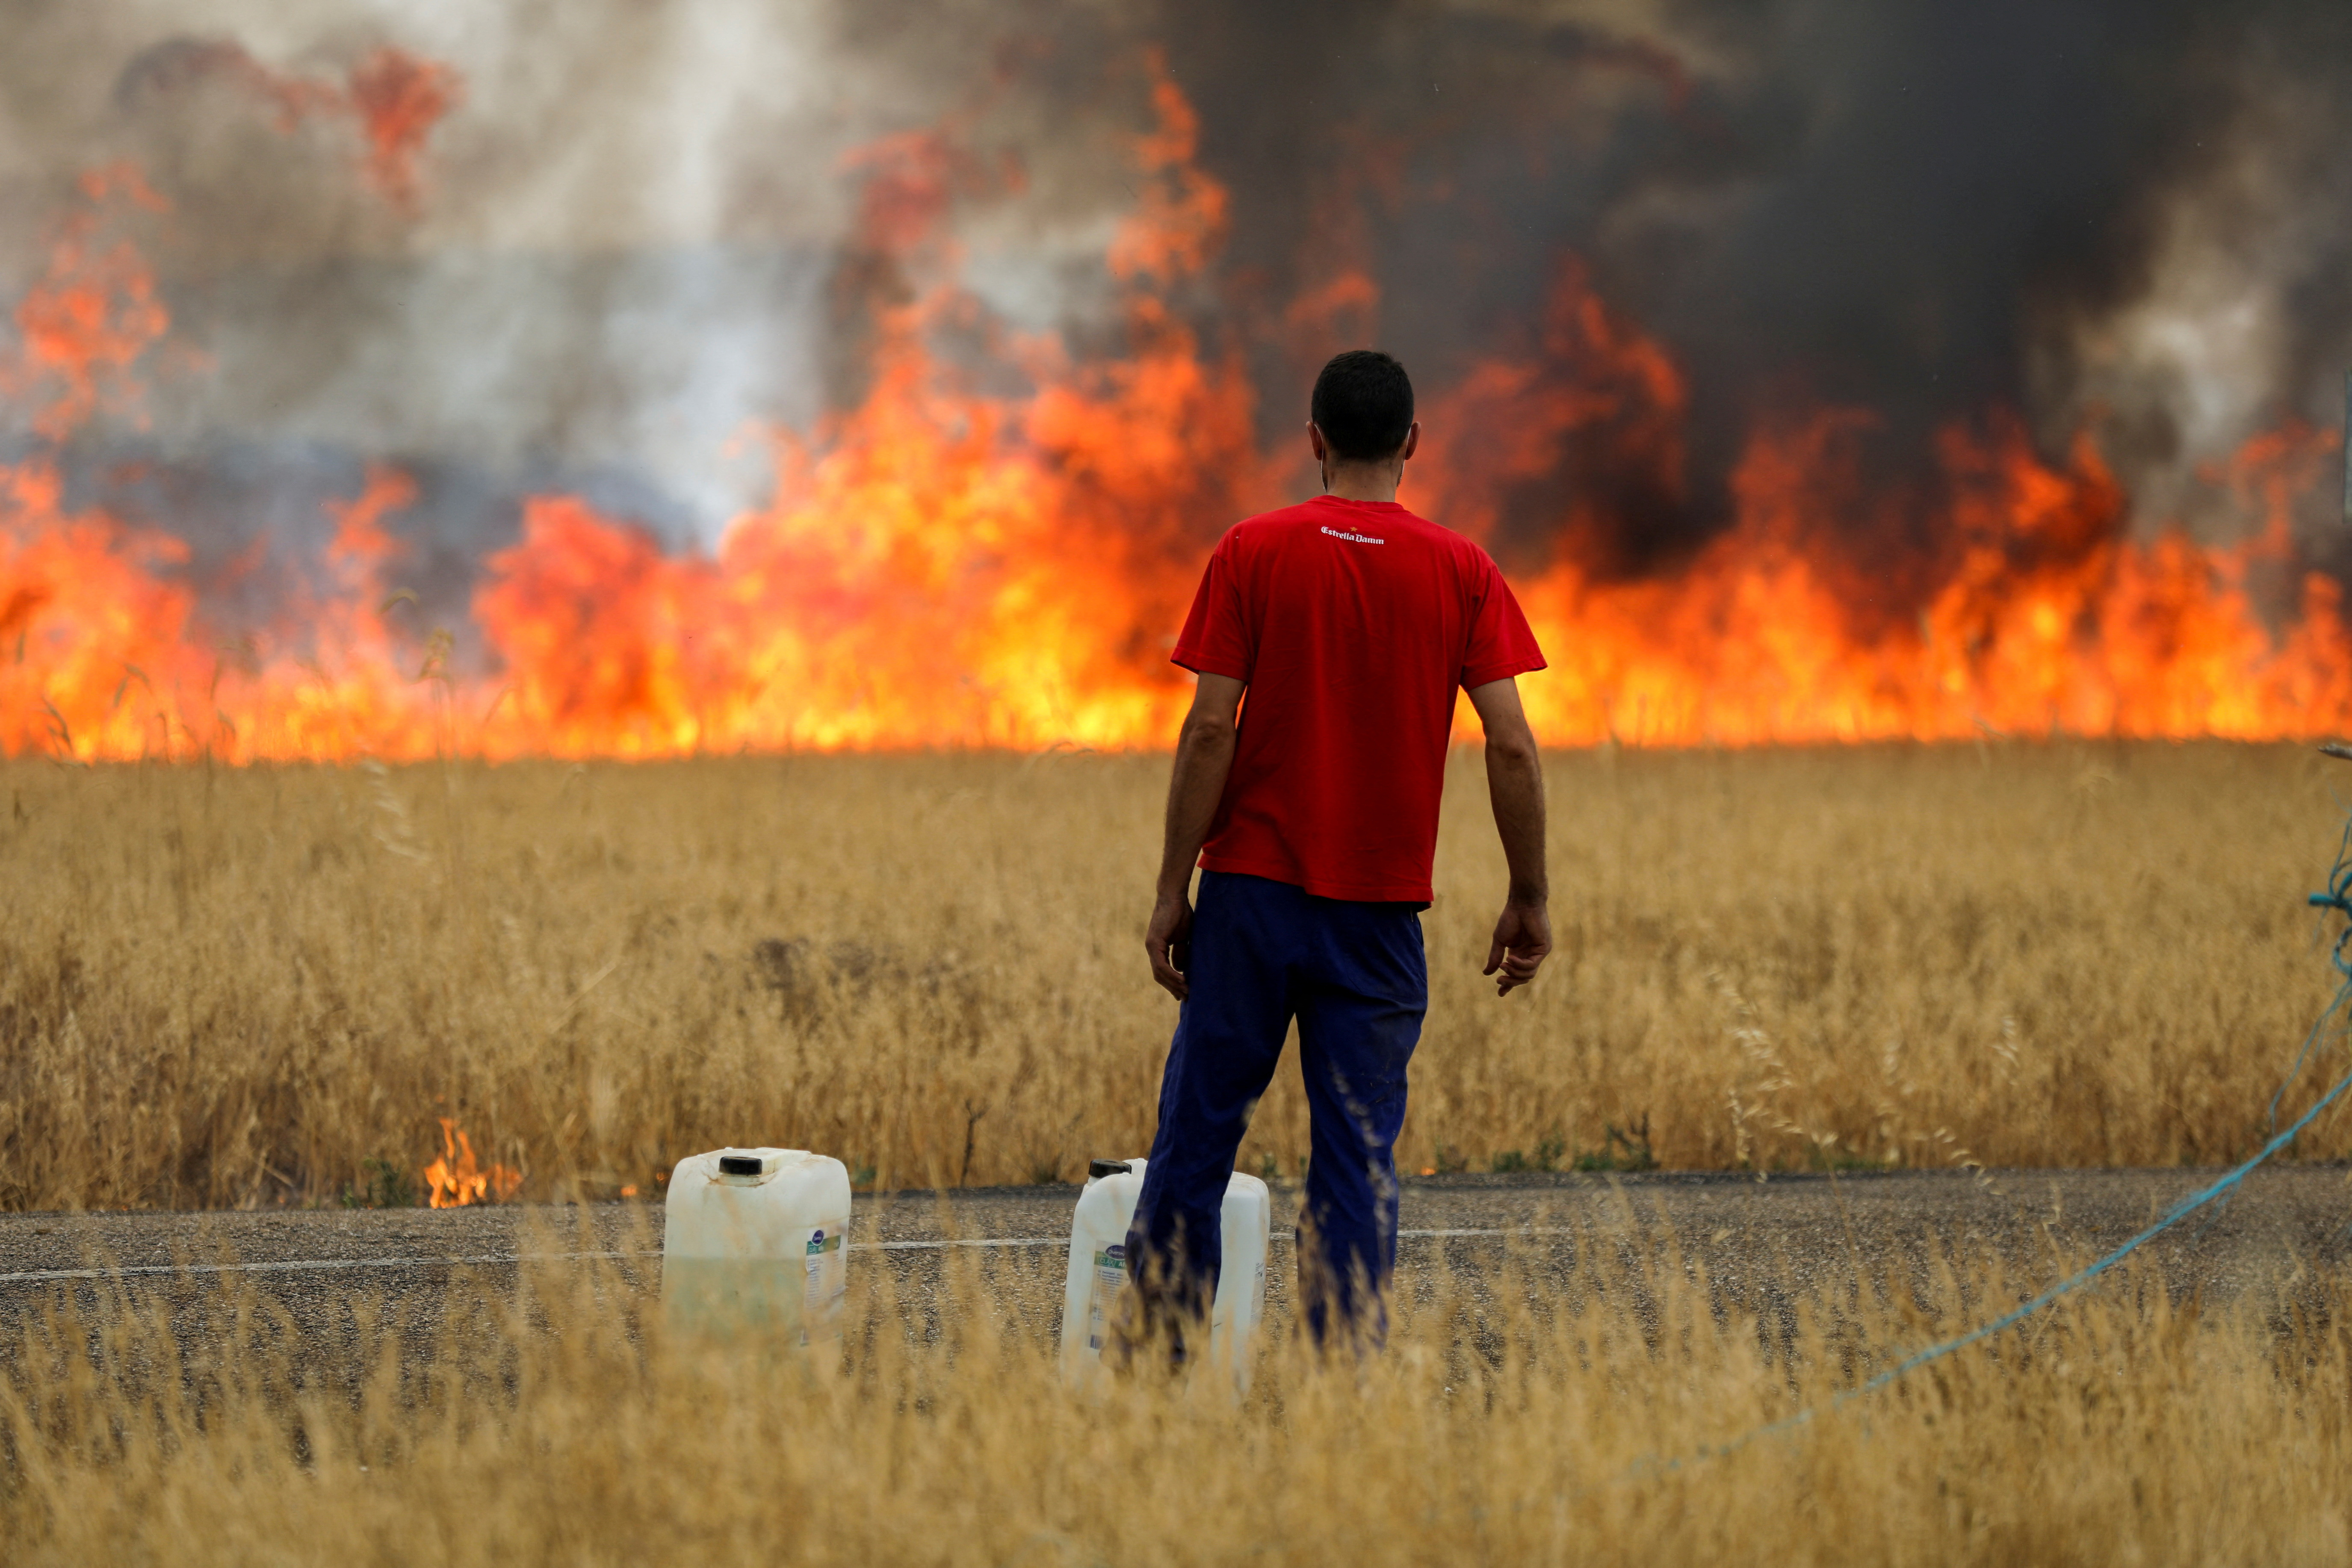 Wildfire rages as Spain experiences its second heatwave of the year, in Tabara